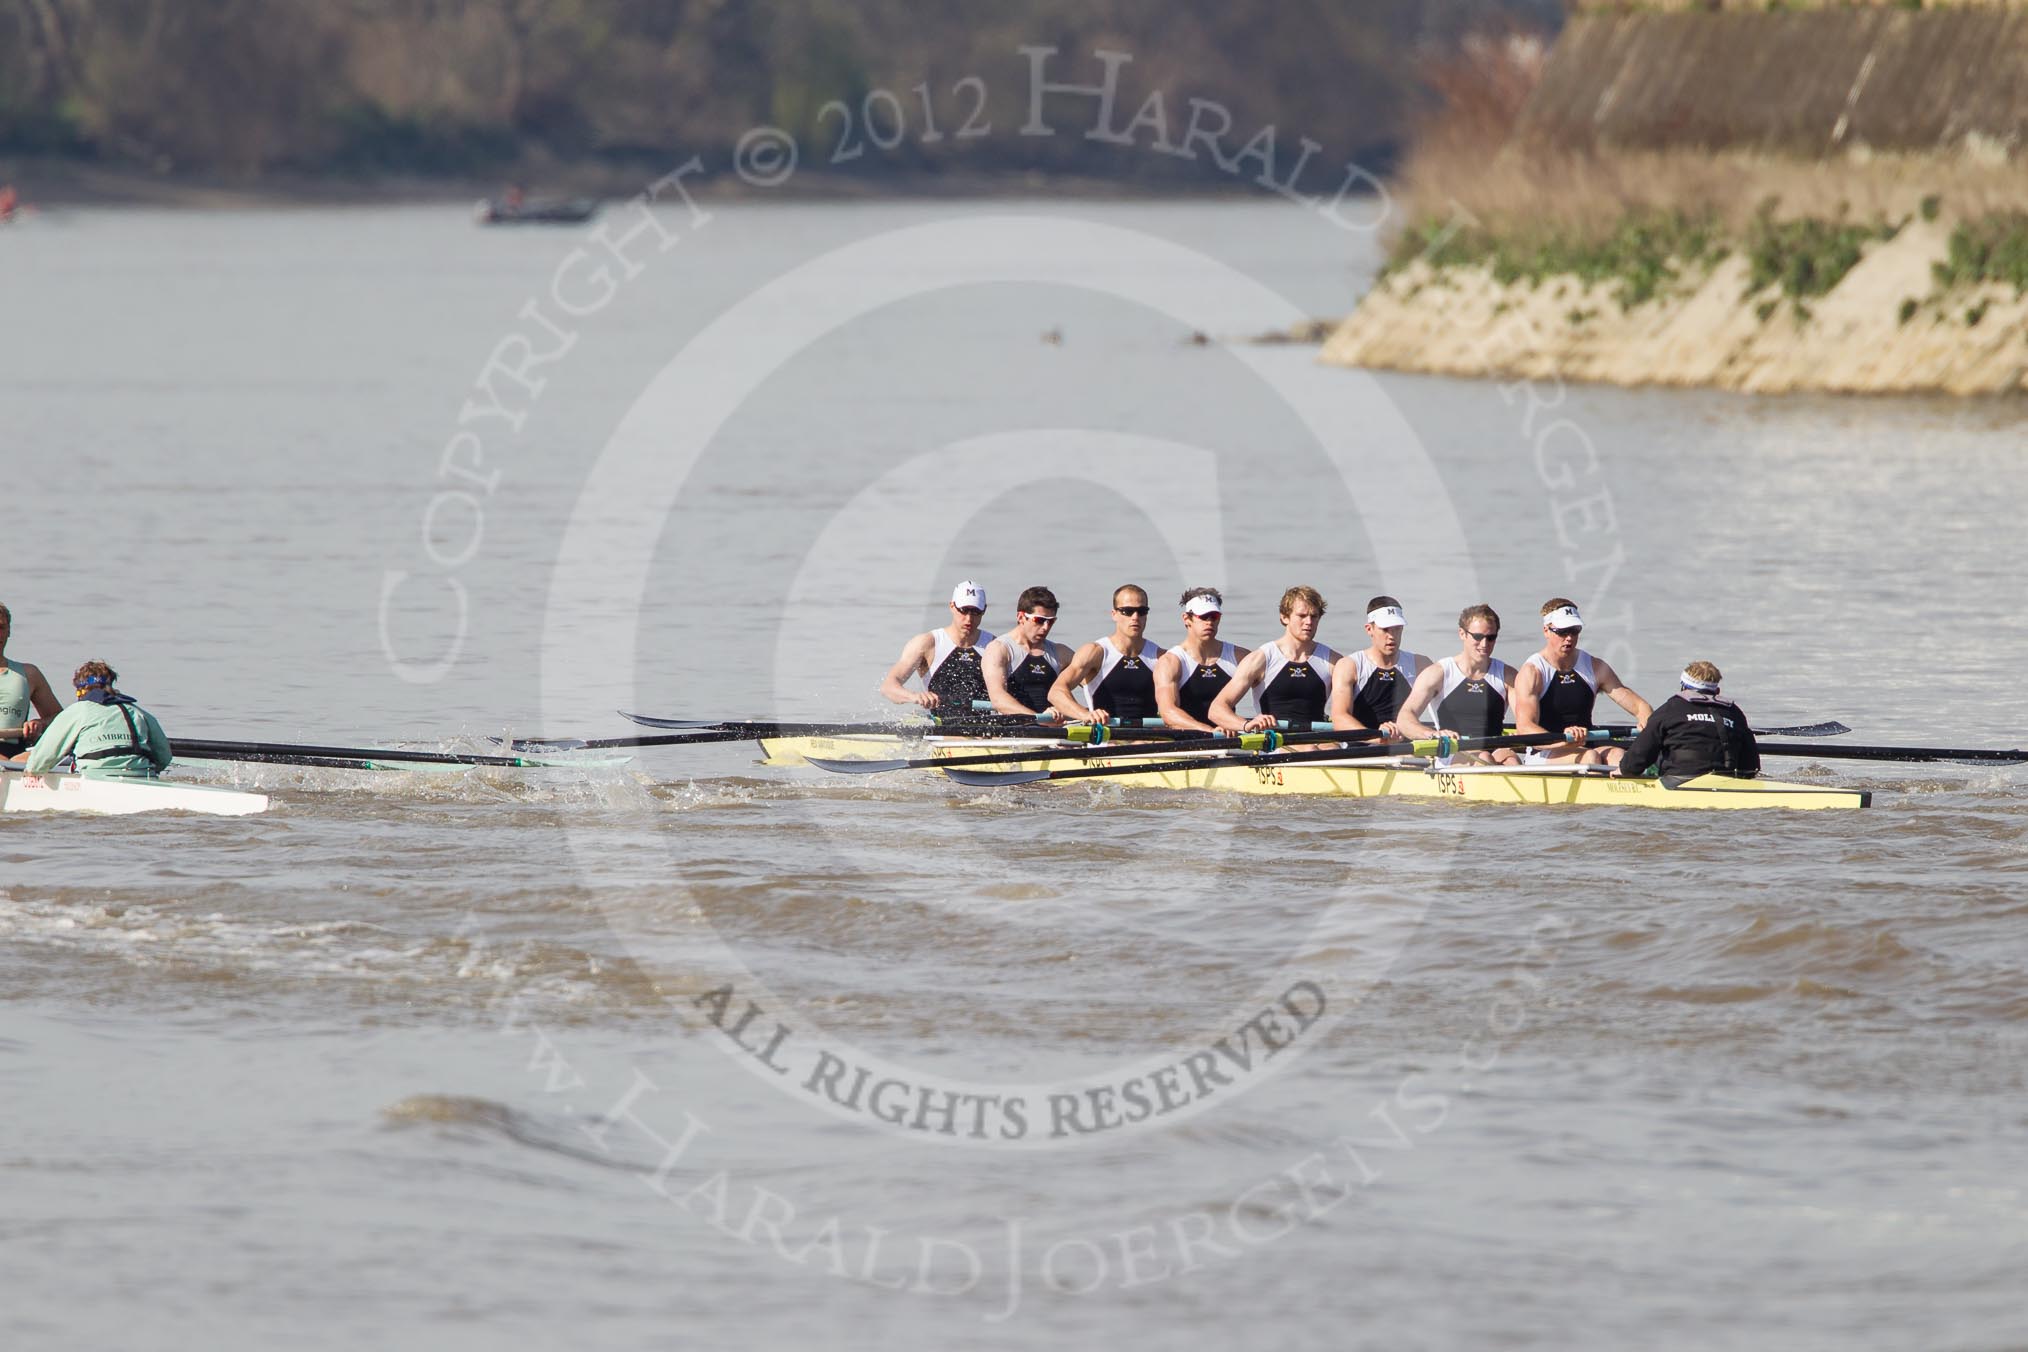 The Boat Race season 2012 - fixture CUBC vs Molesey BC.




on 25 March 2012 at 15:19, image #132